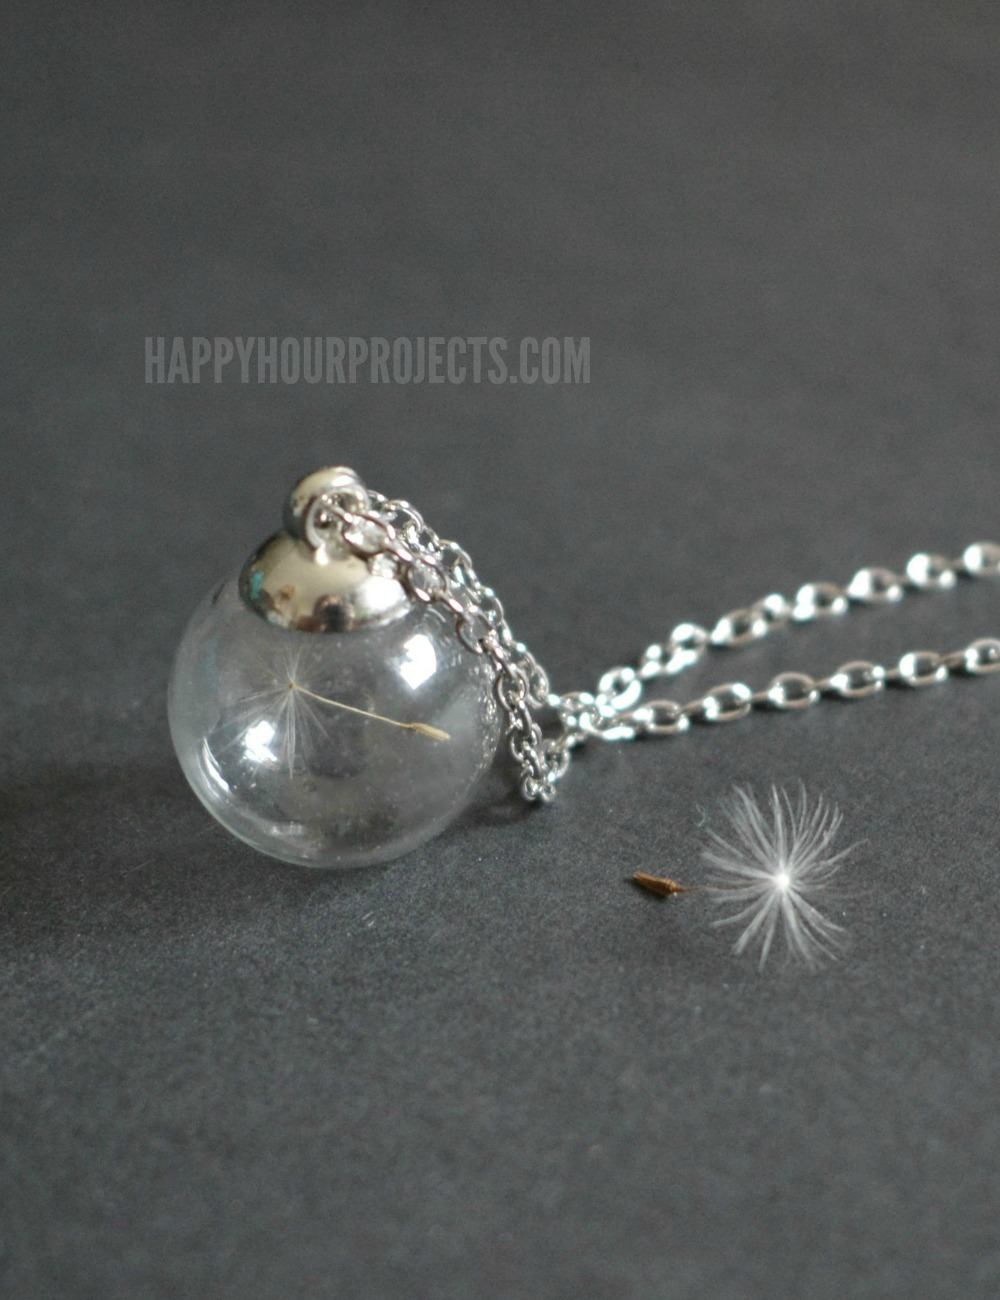 DIY Dandelion Seed Necklace | An easy-to-make jewelry gift or keepsake at happyhourprojects.com. Only takes about 10 minutes!